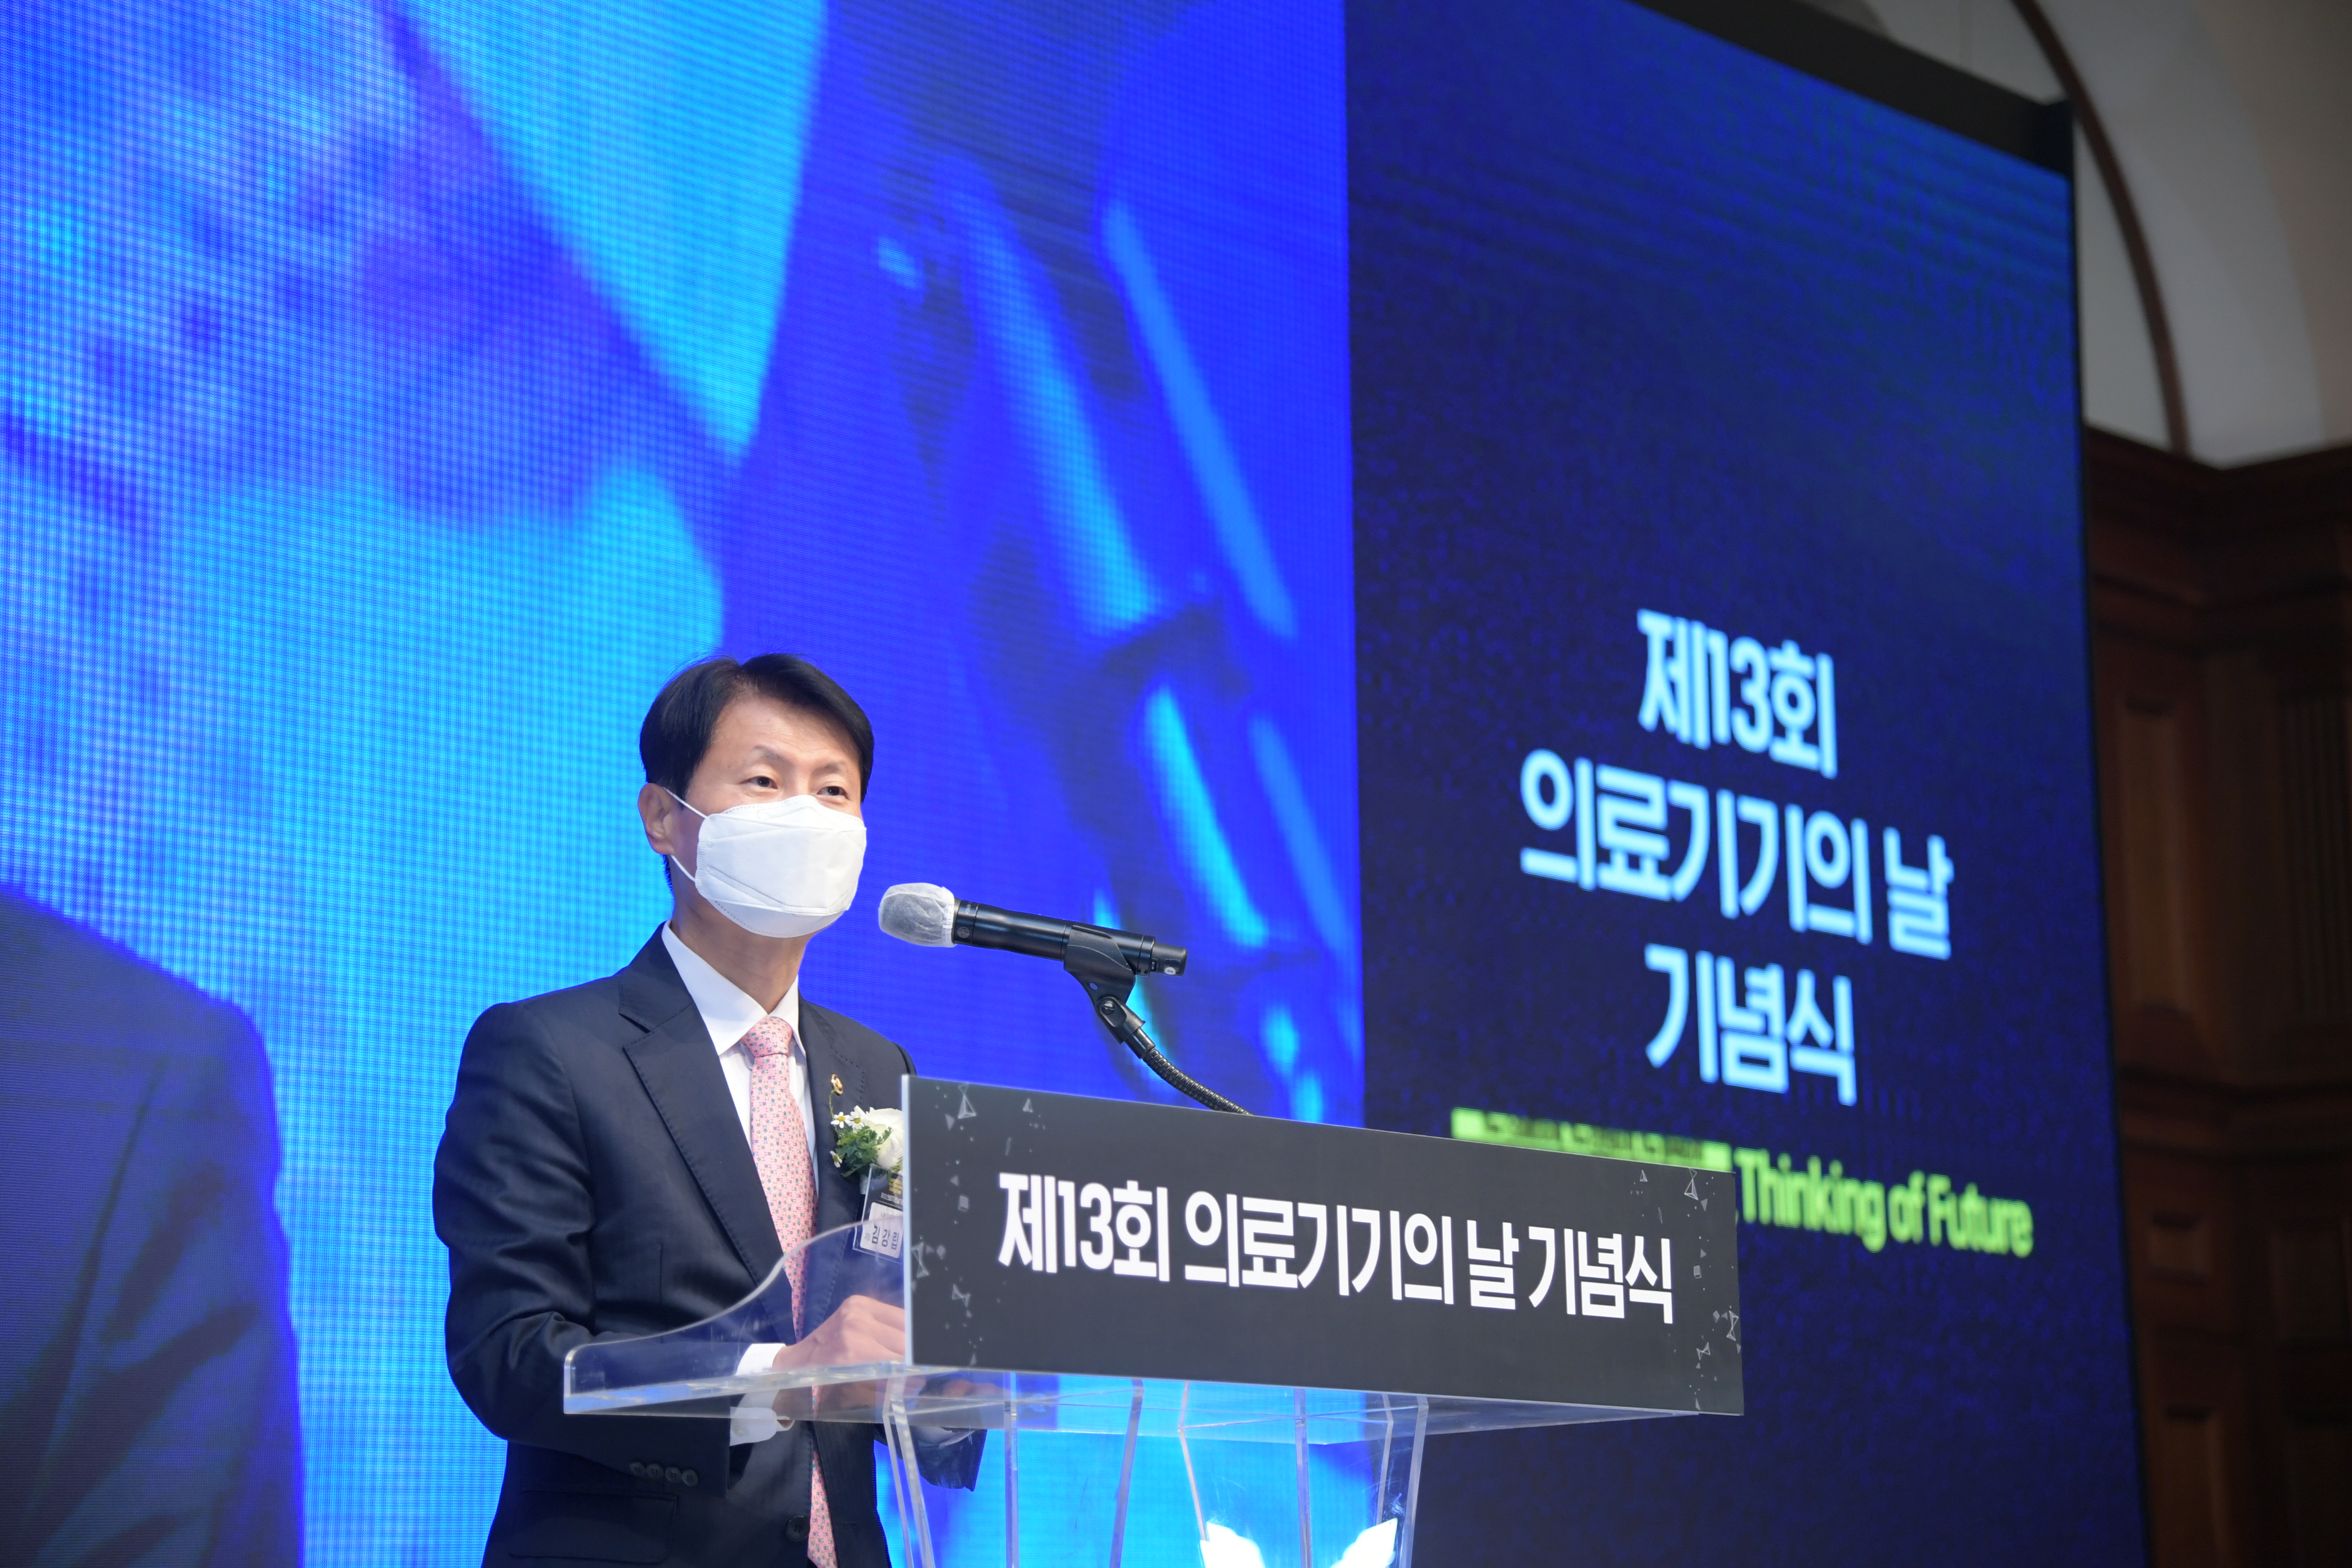 Photo News3 - [Nov. 20, 2020] A Commemorative Ceremony of the 13th Day of Medical Device